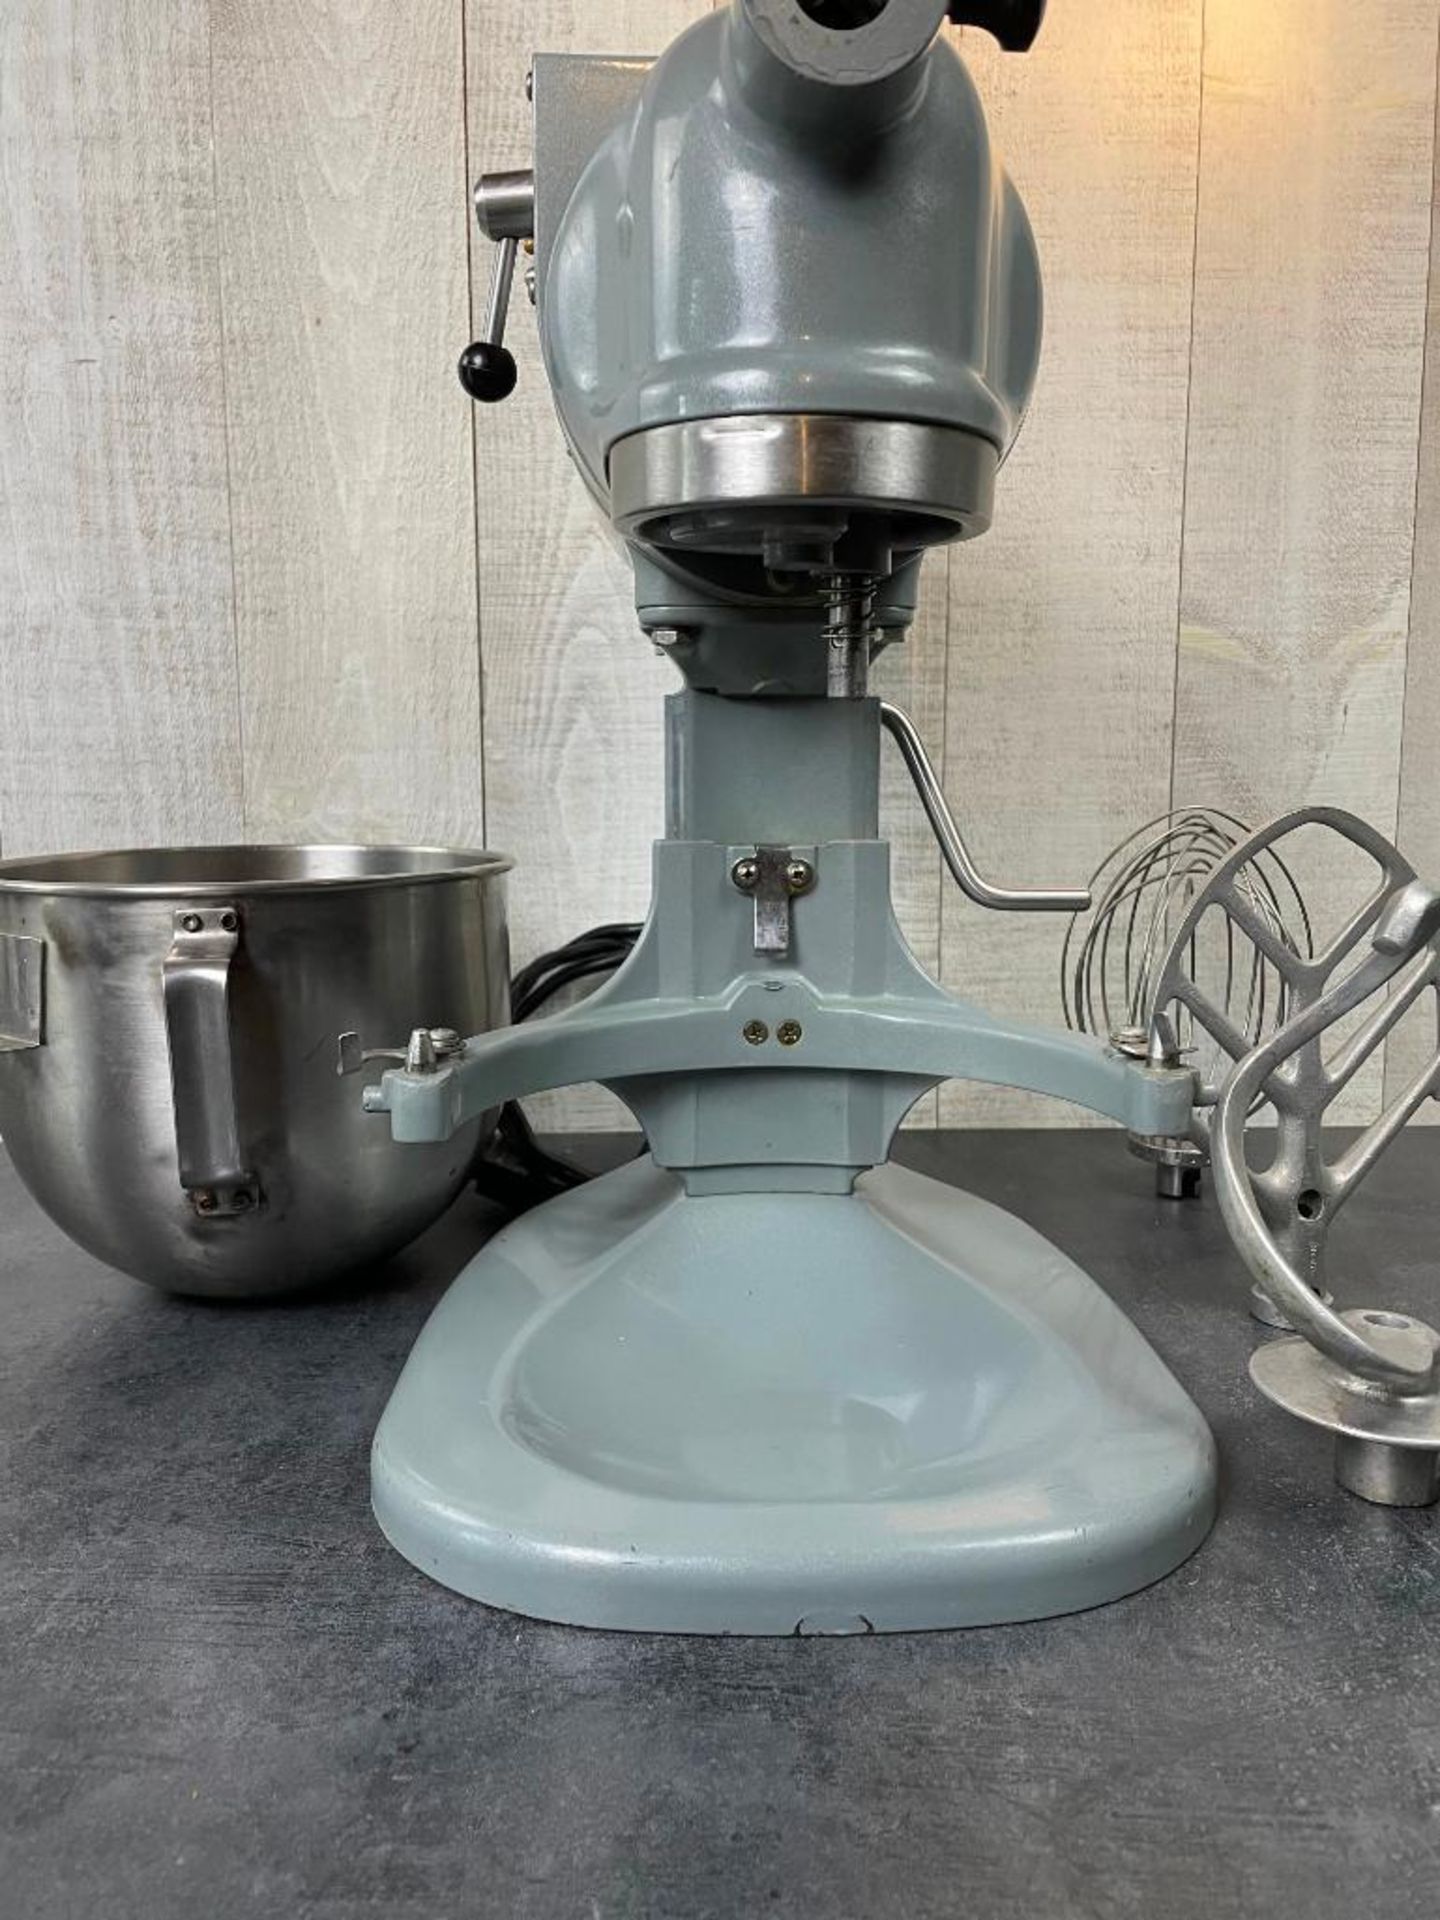 HOBART N50 5QT MIXER WITH HOOK, WHIP, PADDLE - Image 8 of 9